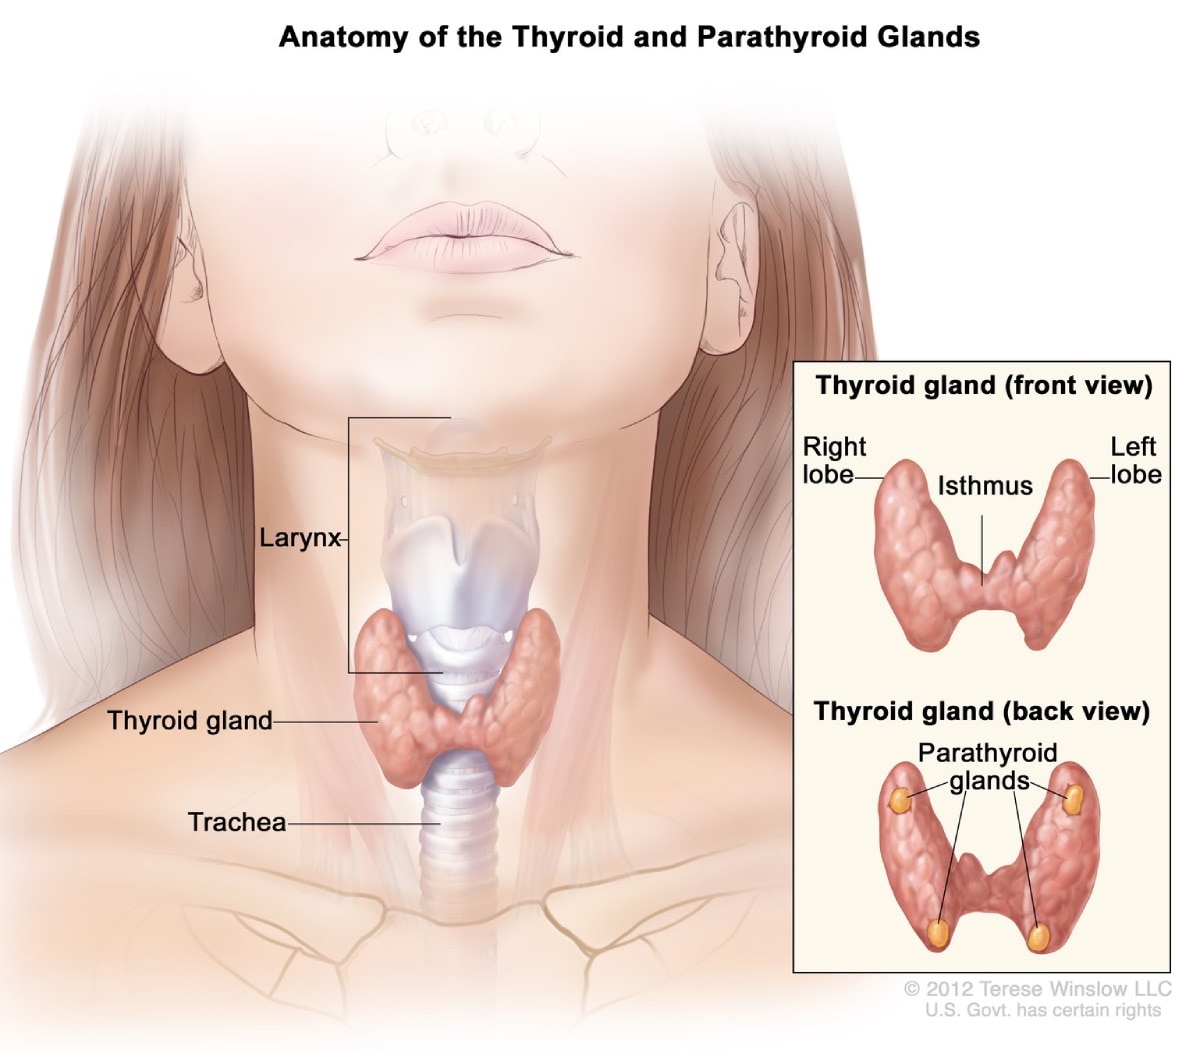 Illustration of the parathyroid glands and their location in the neck.